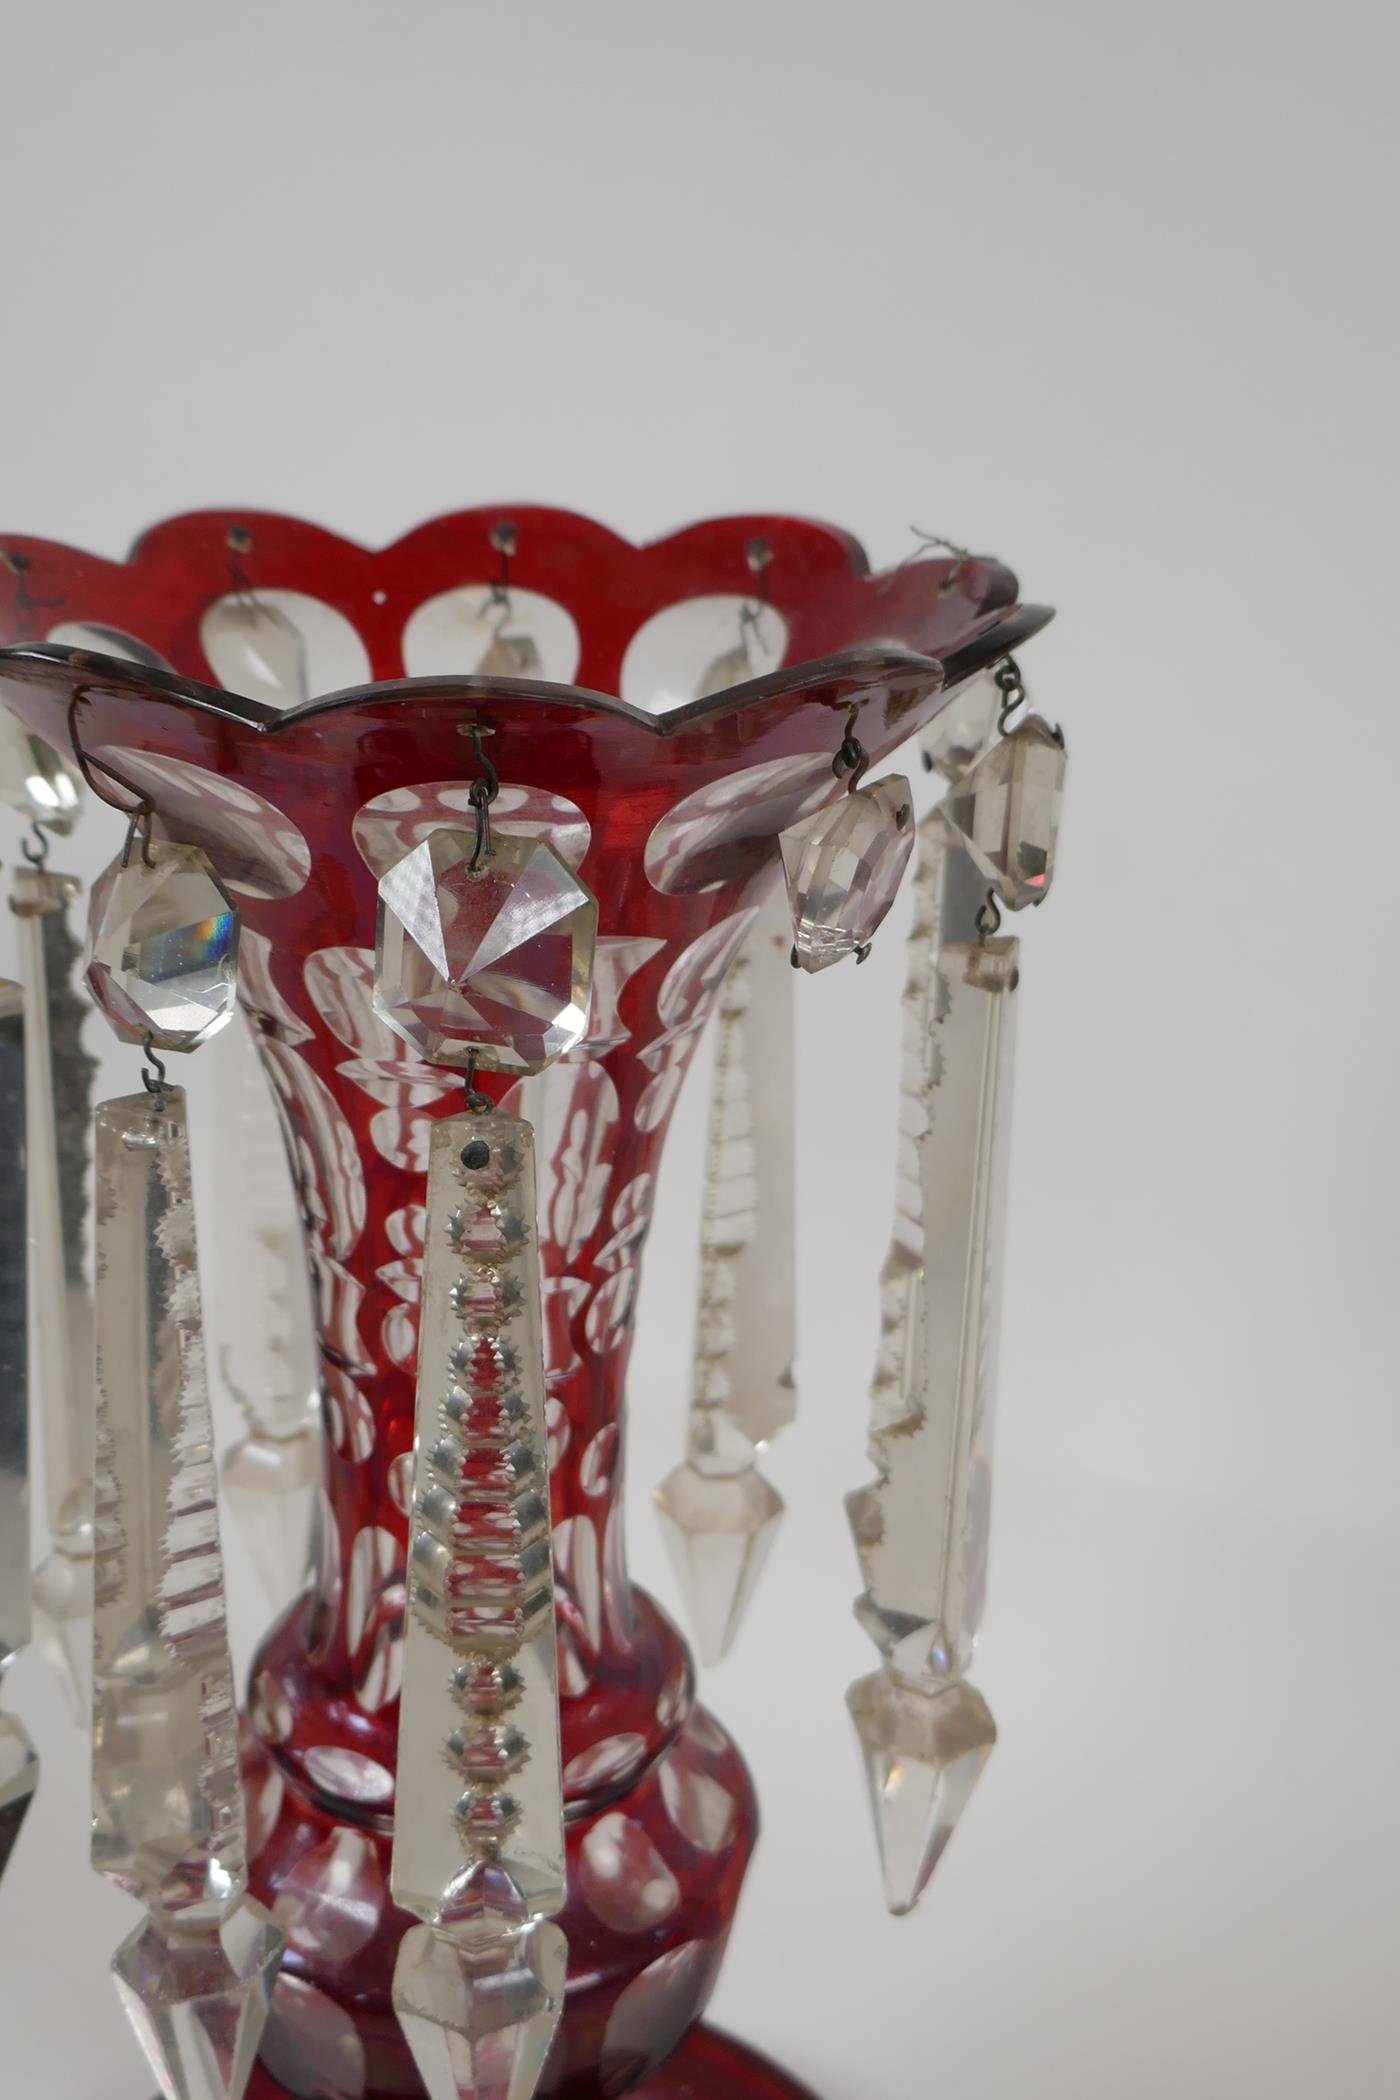 A Bohemian ruby glass lustre with slice cut decoration, 1 lustre missing, 12½" high - Image 3 of 3